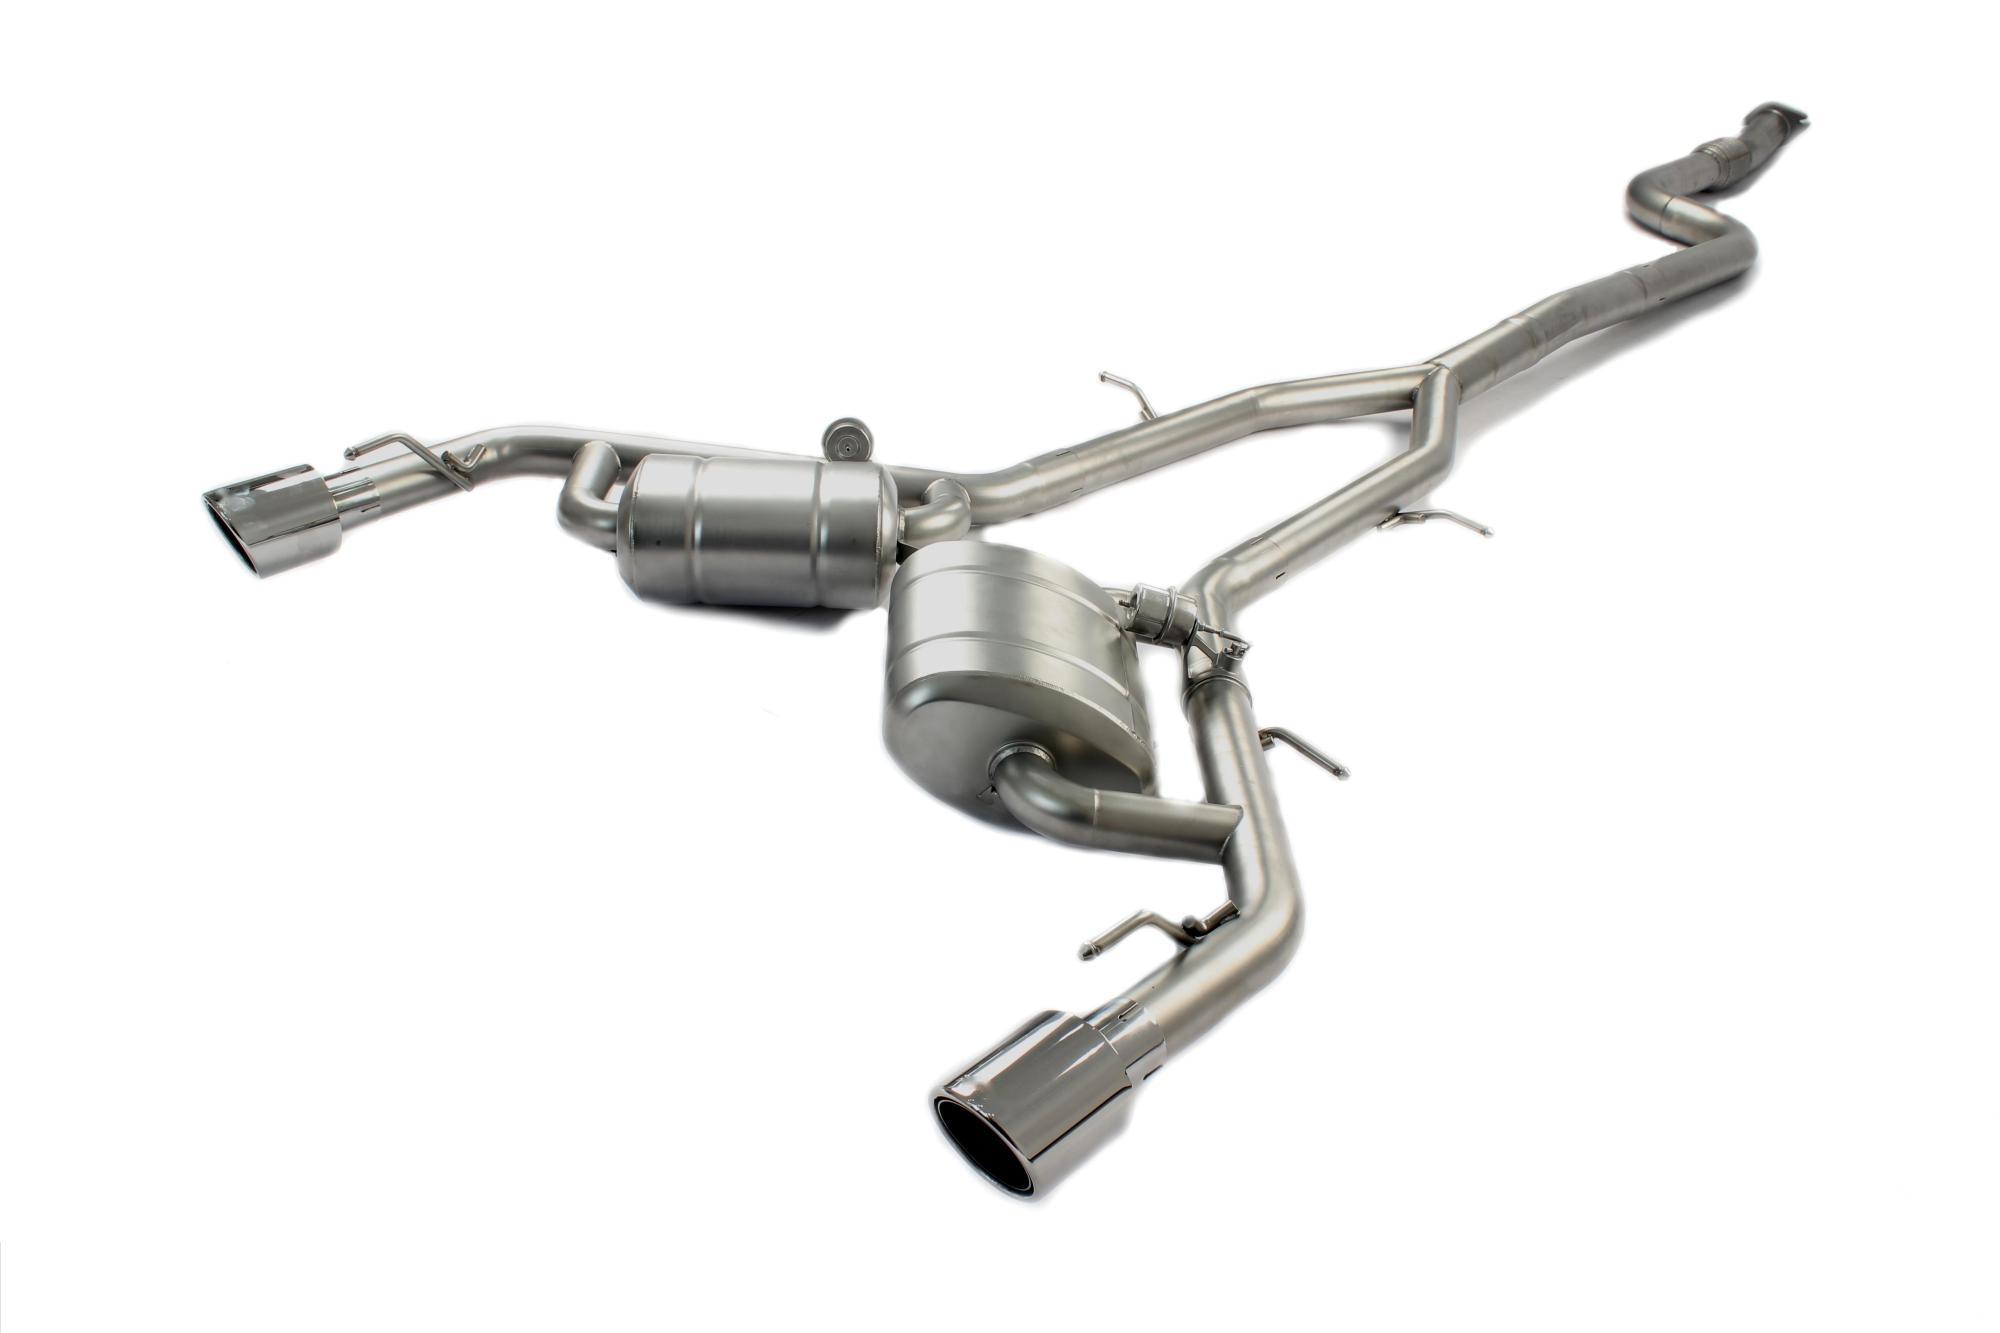 Chevrolet Camaro stainless steel exhaust system